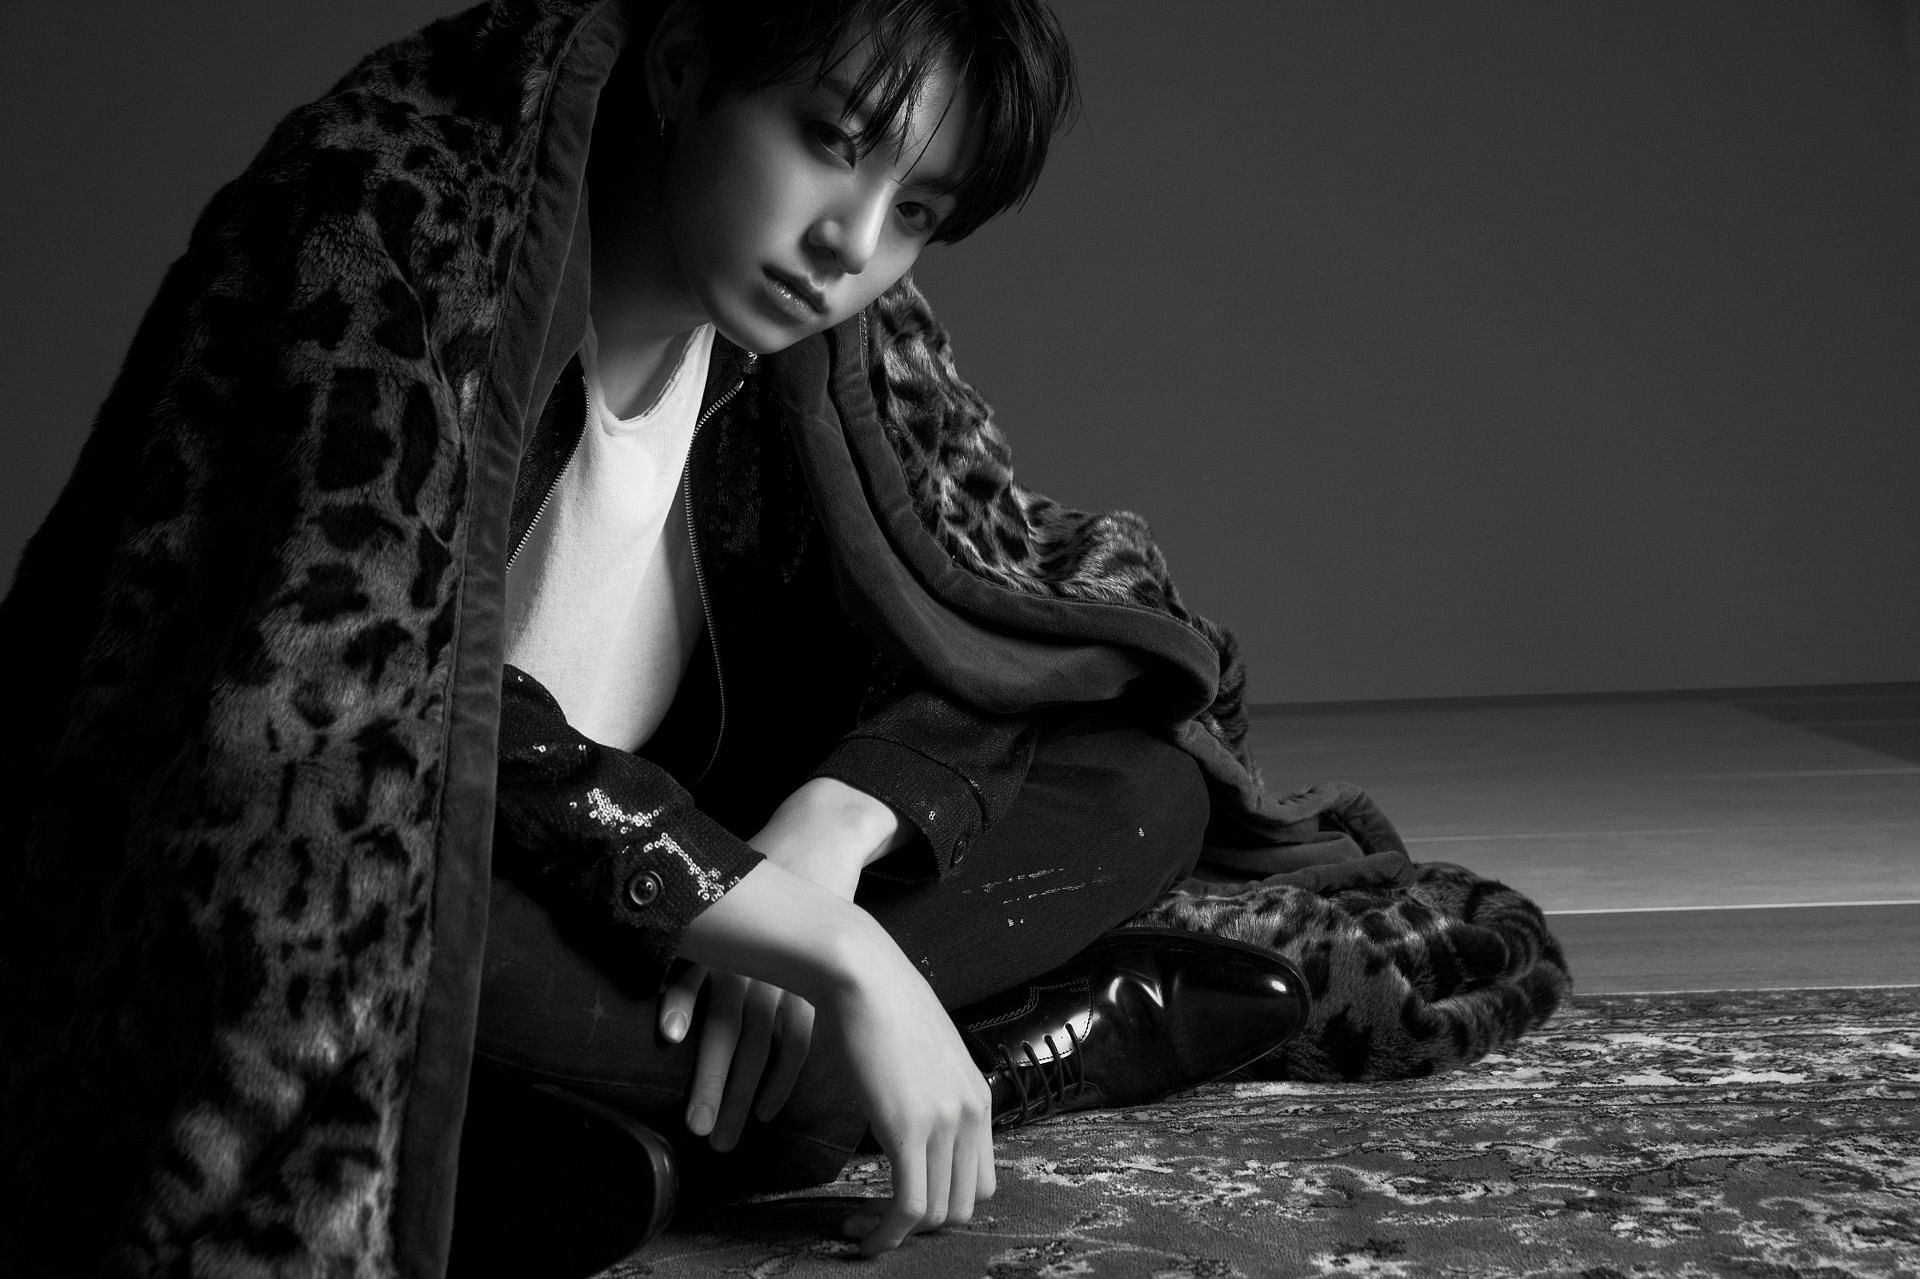 BTS Jungkook Love Yourself: Tear concept photo (Image via @BIGHIT_MUSIC/Twitter)